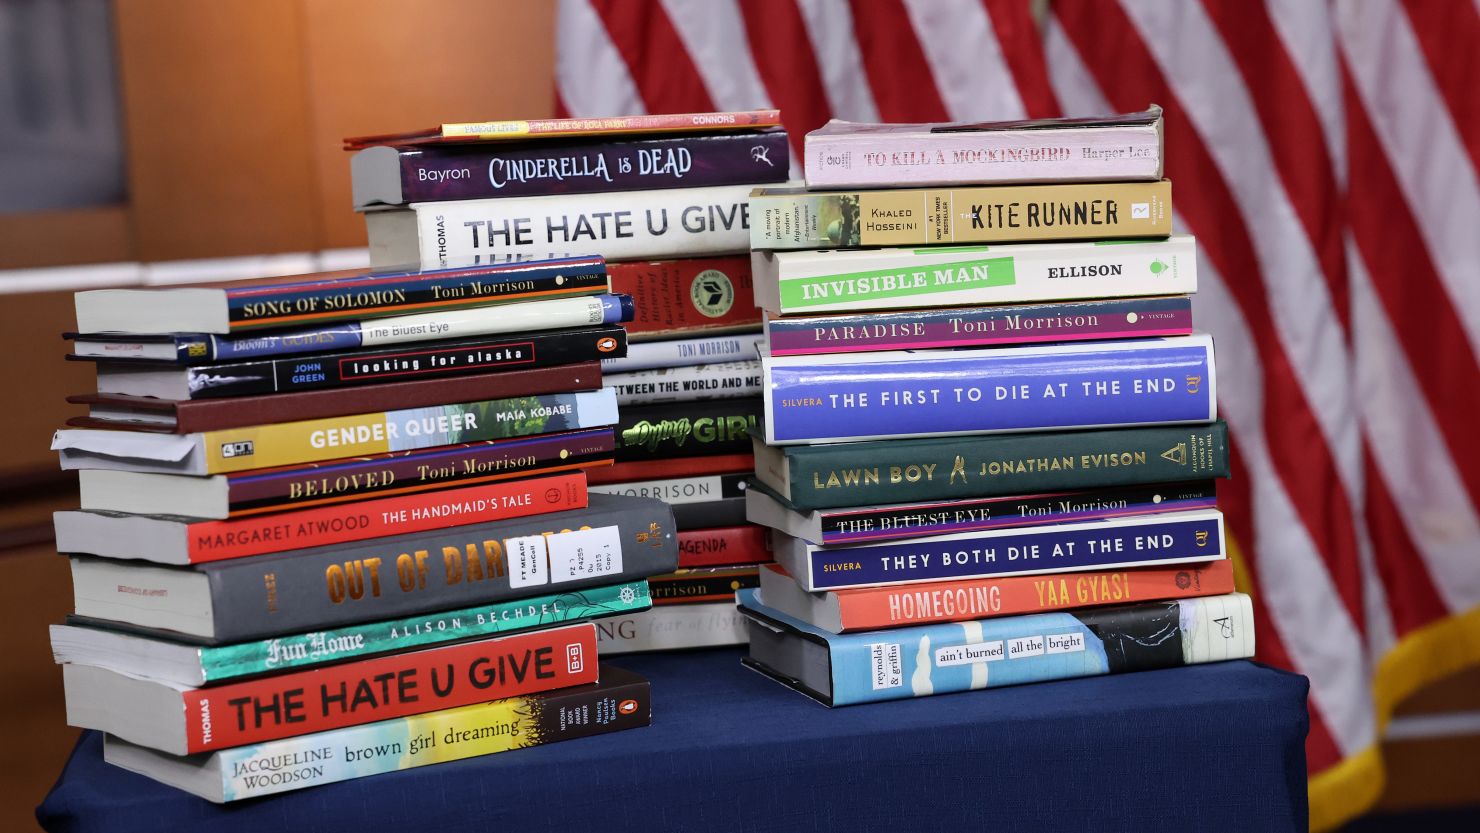 Books like "Beloved" by Toni Morrison and "The Hate U Give" by Angie Thomas are some of the many books banned in various states and school districts across the US.